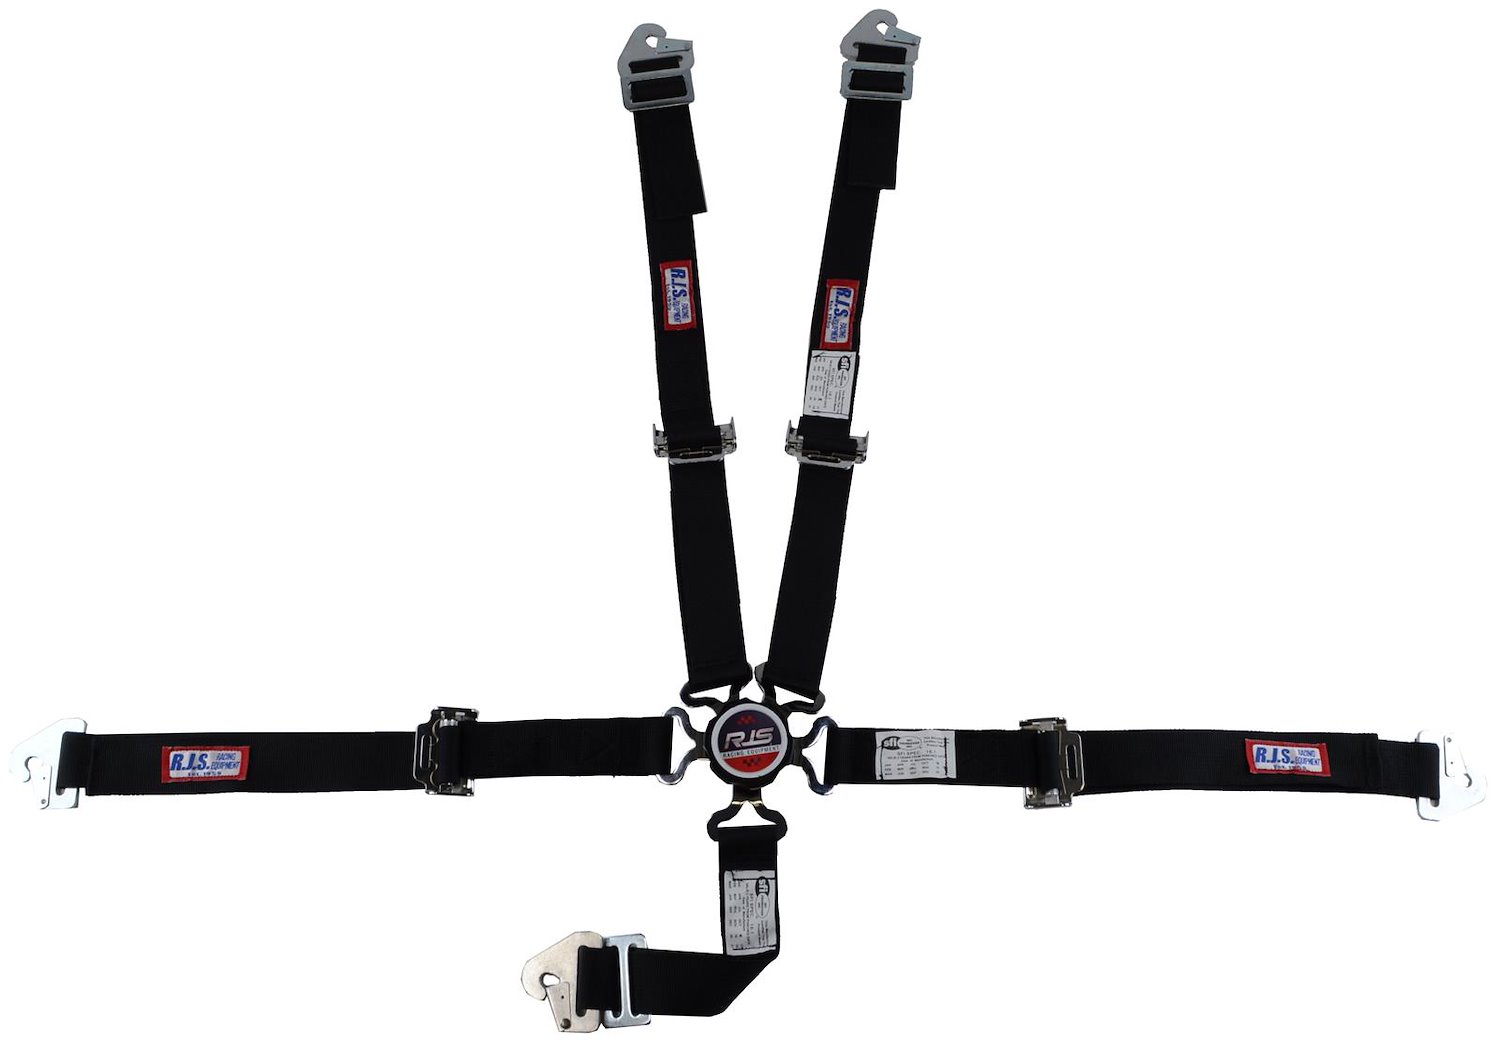 SFI 16.1 CAM-LOCK HARNESS 2 PULL DOWN Lap Belt 2 Shoulder Harness Individual FLOOR Mount 2 DOUBLESub ALL WRAP ENDS HOT PINK